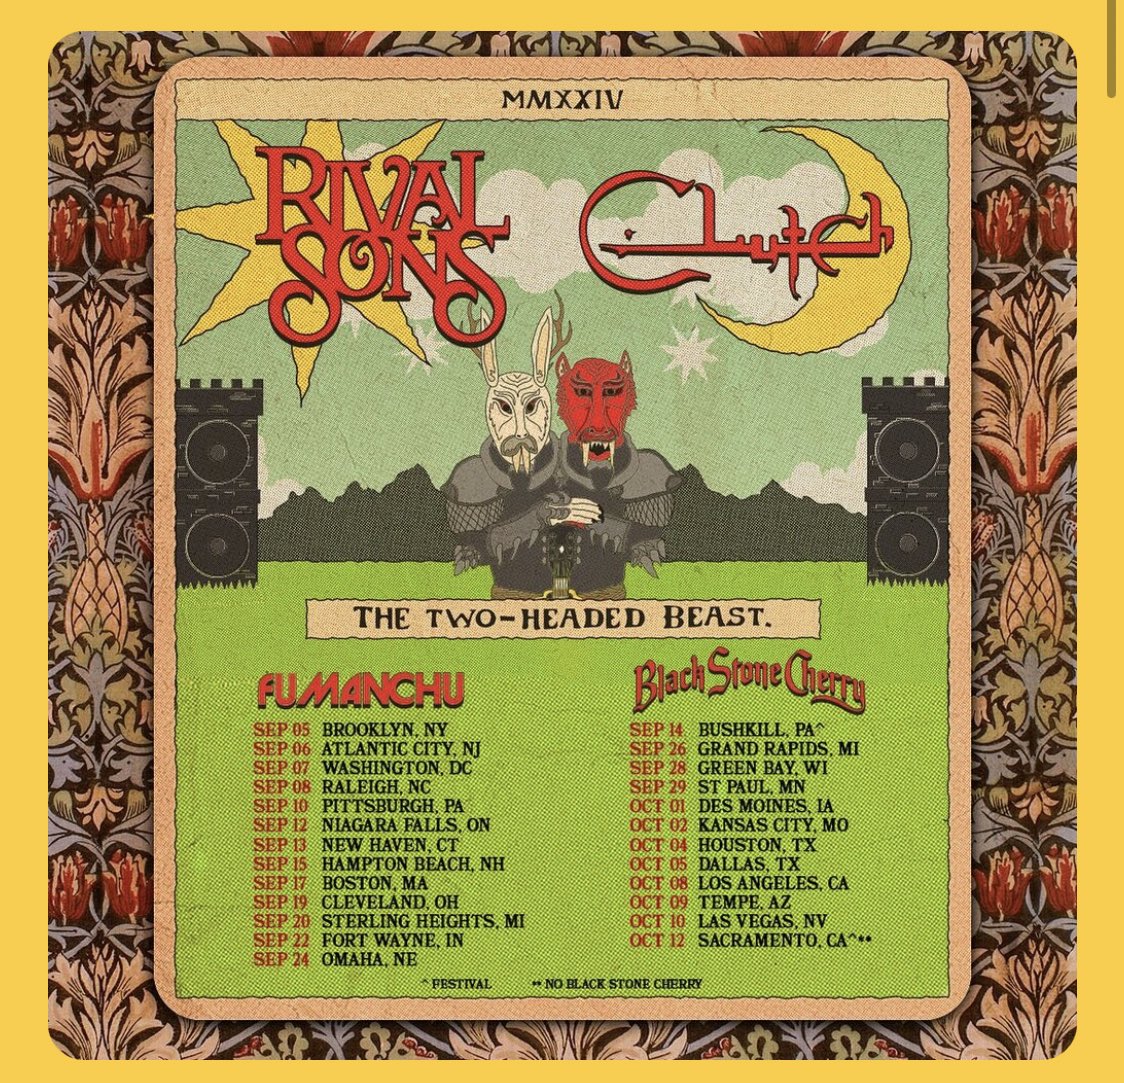 The Two Headed Beast Tour from @clutchofficial and @rivalsons is coming to a city near you this fall 👹 Tickets go on sale tomorrow, 4/19 at 10 am local time!! go.axs.com/3Kh950Rjl9m